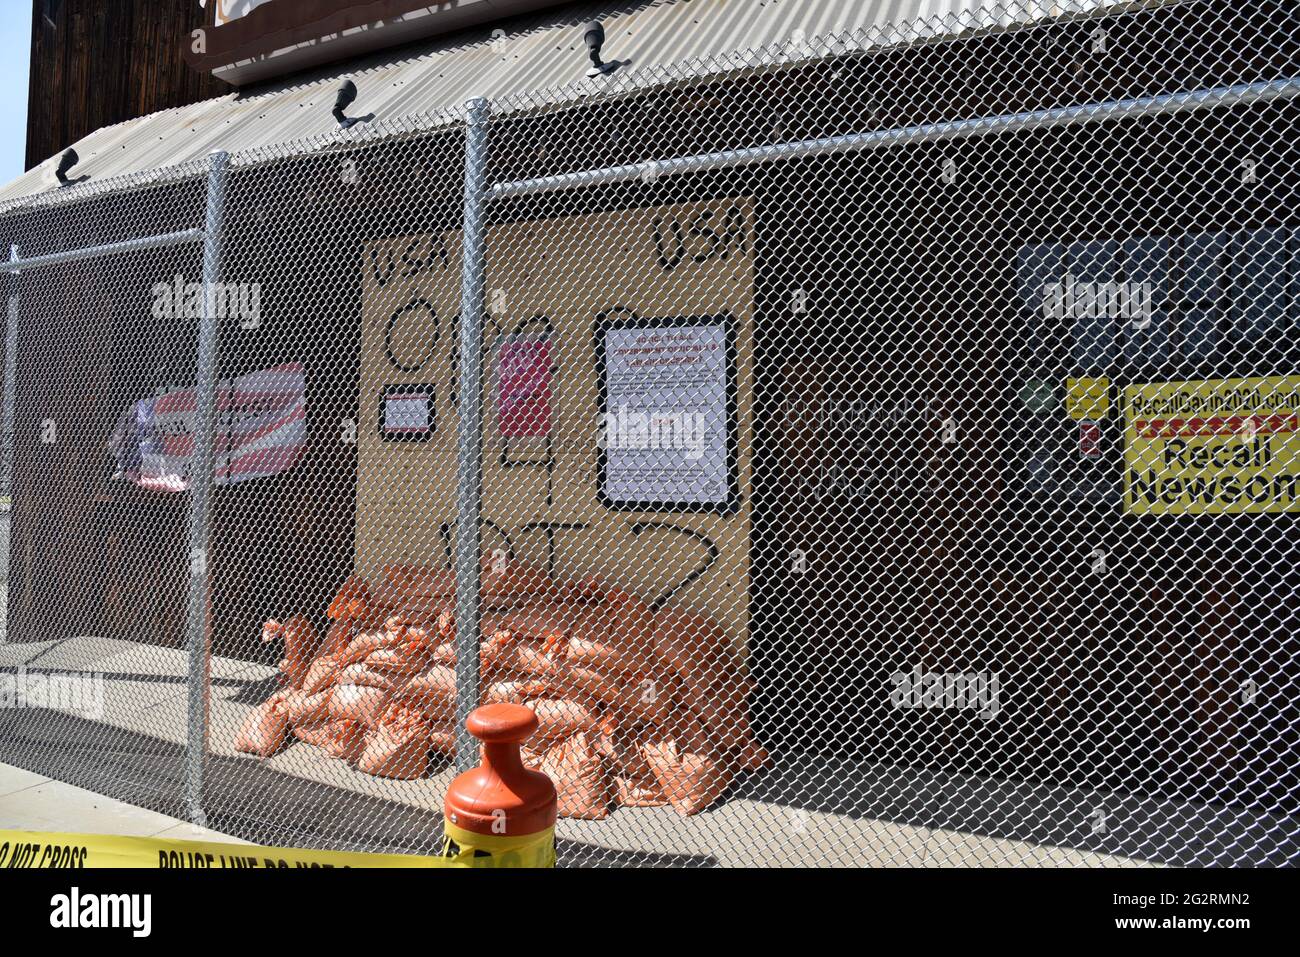 Burbank, CA USA - Aprl 9, 2021: Tinhorn Flats entrance boarded, sandbagged and fenced in by city to penalize it for having opened during the December Stock Photo